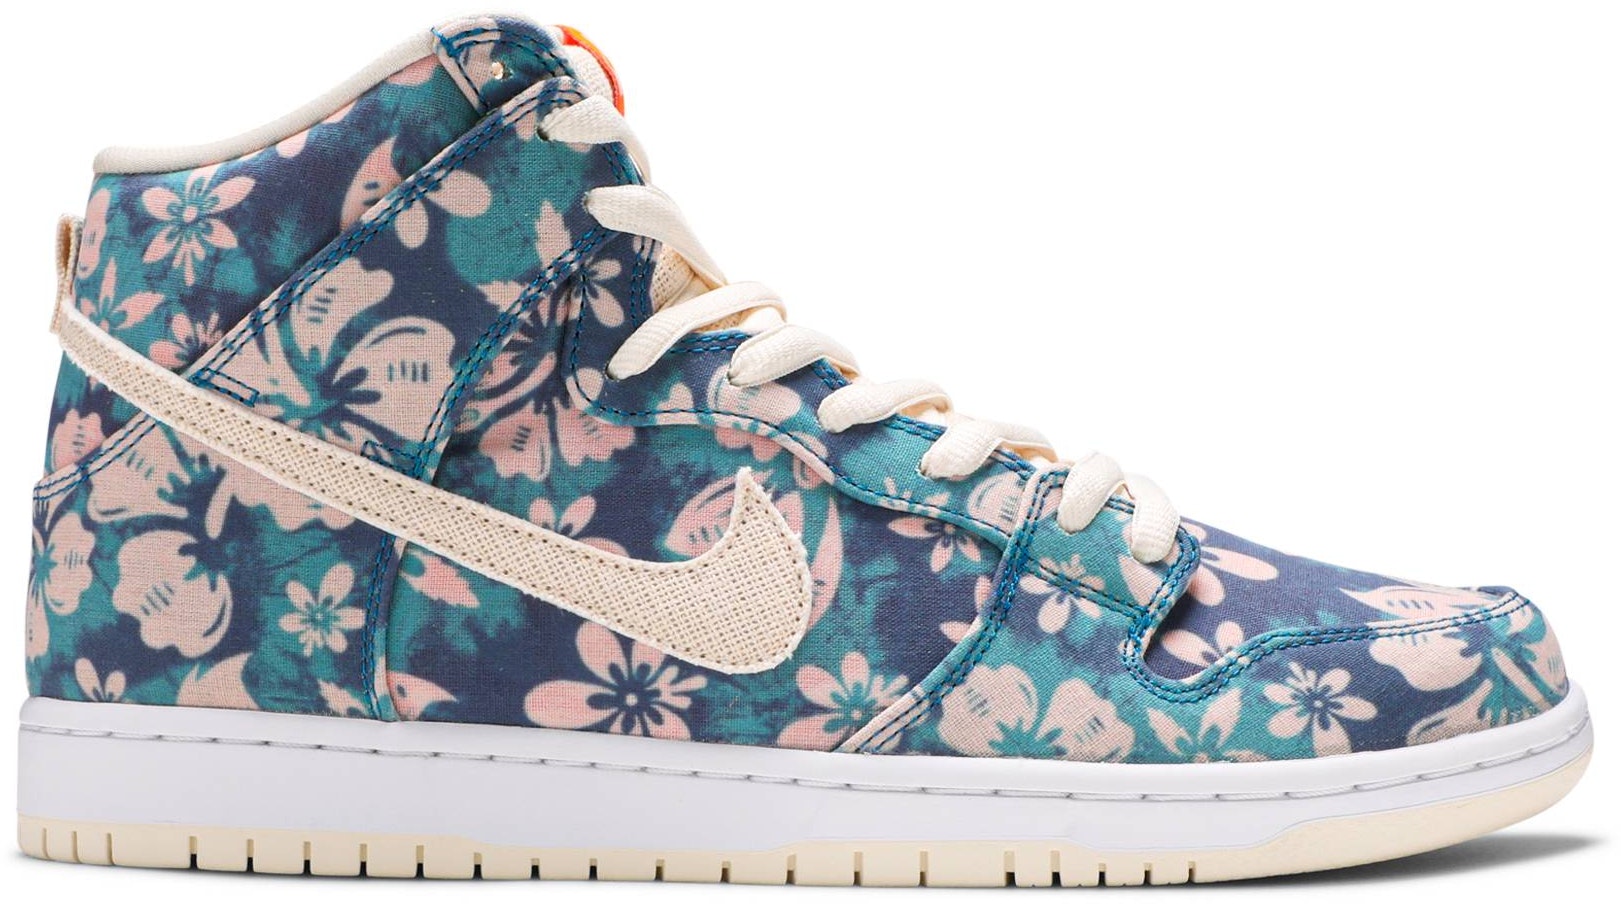 SNKRS Confirms Release Date for the 'Hawaii' Nike SB Dunk High